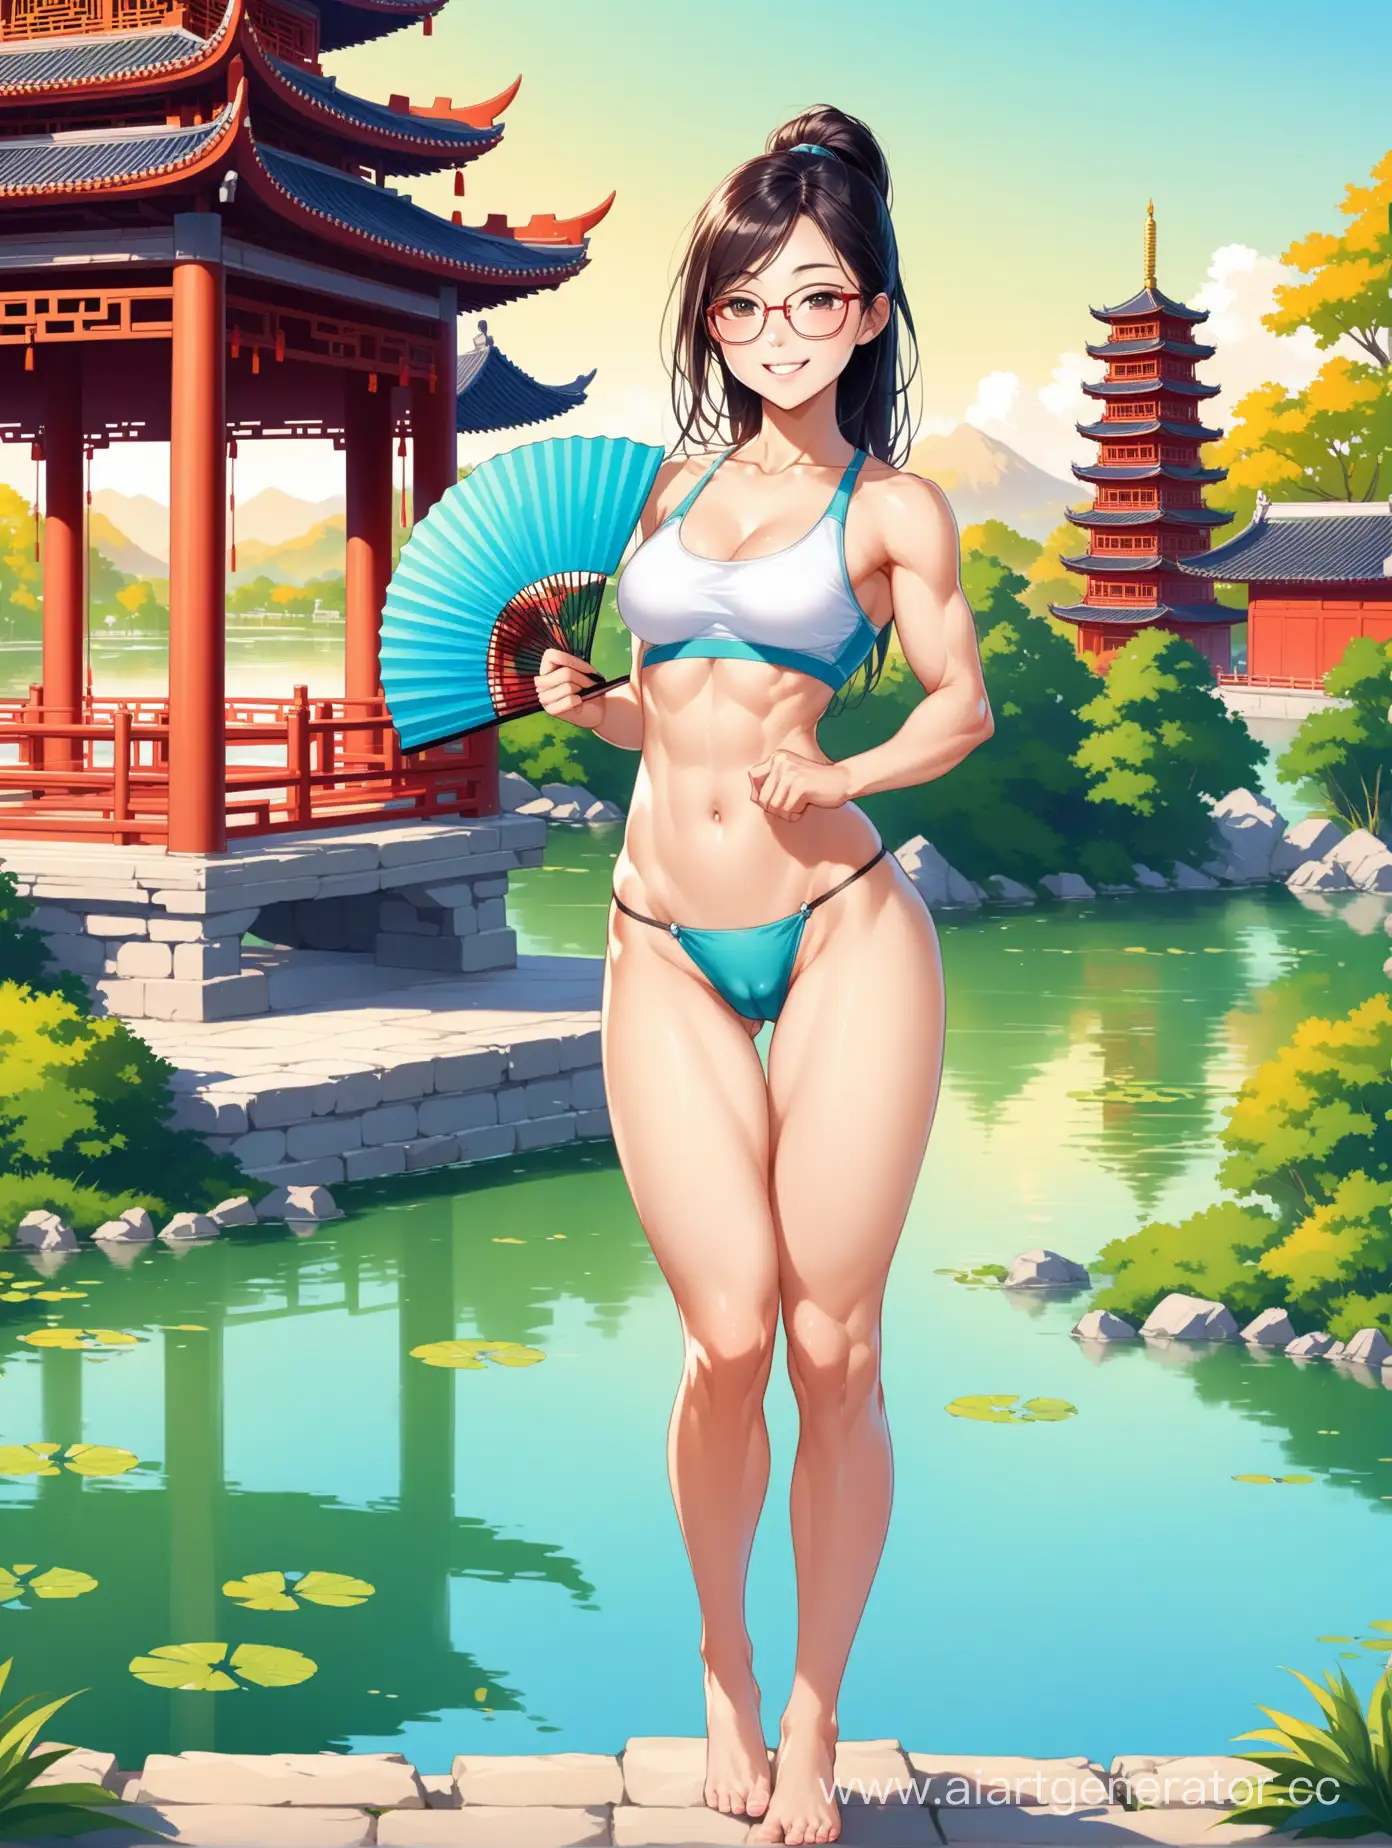 A full-length, thin, smiling Chinese young woman with a narrow waist, wide pelvis, muscular legs and hairy crotch, wearing glasses and carrying a fan, stands near a pond against the background of a pagoda on a bright sunny day